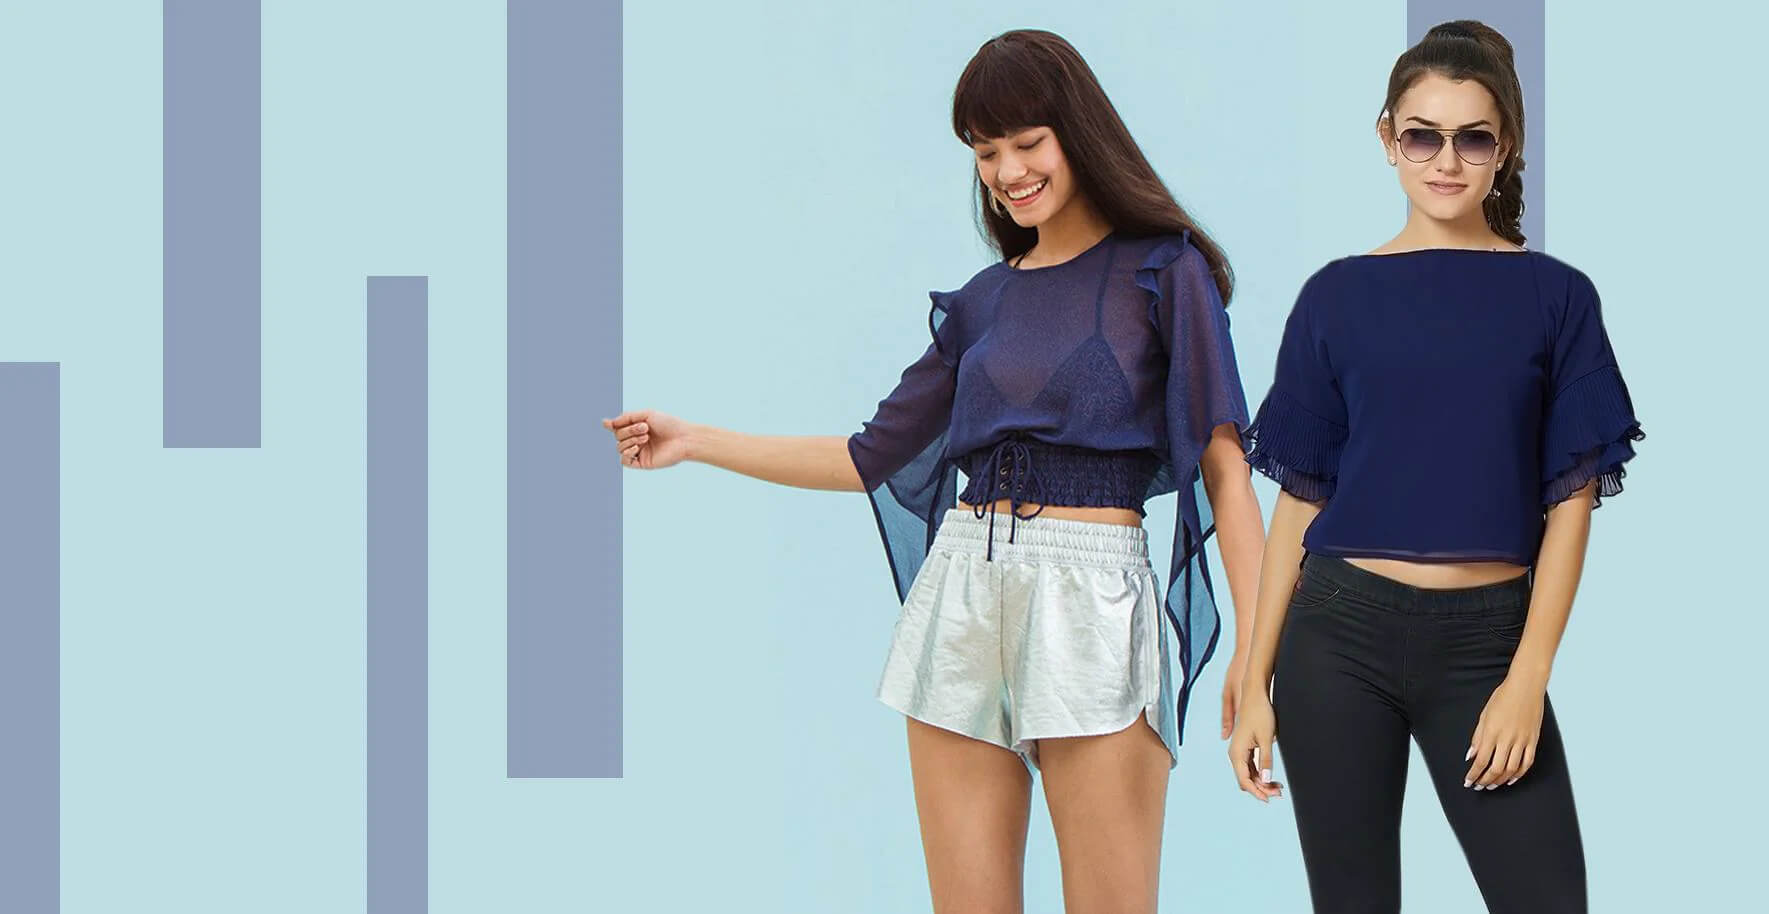 Budget-Friendly Fashion: 5 Women’s Tops Under 200 That Look Expensive